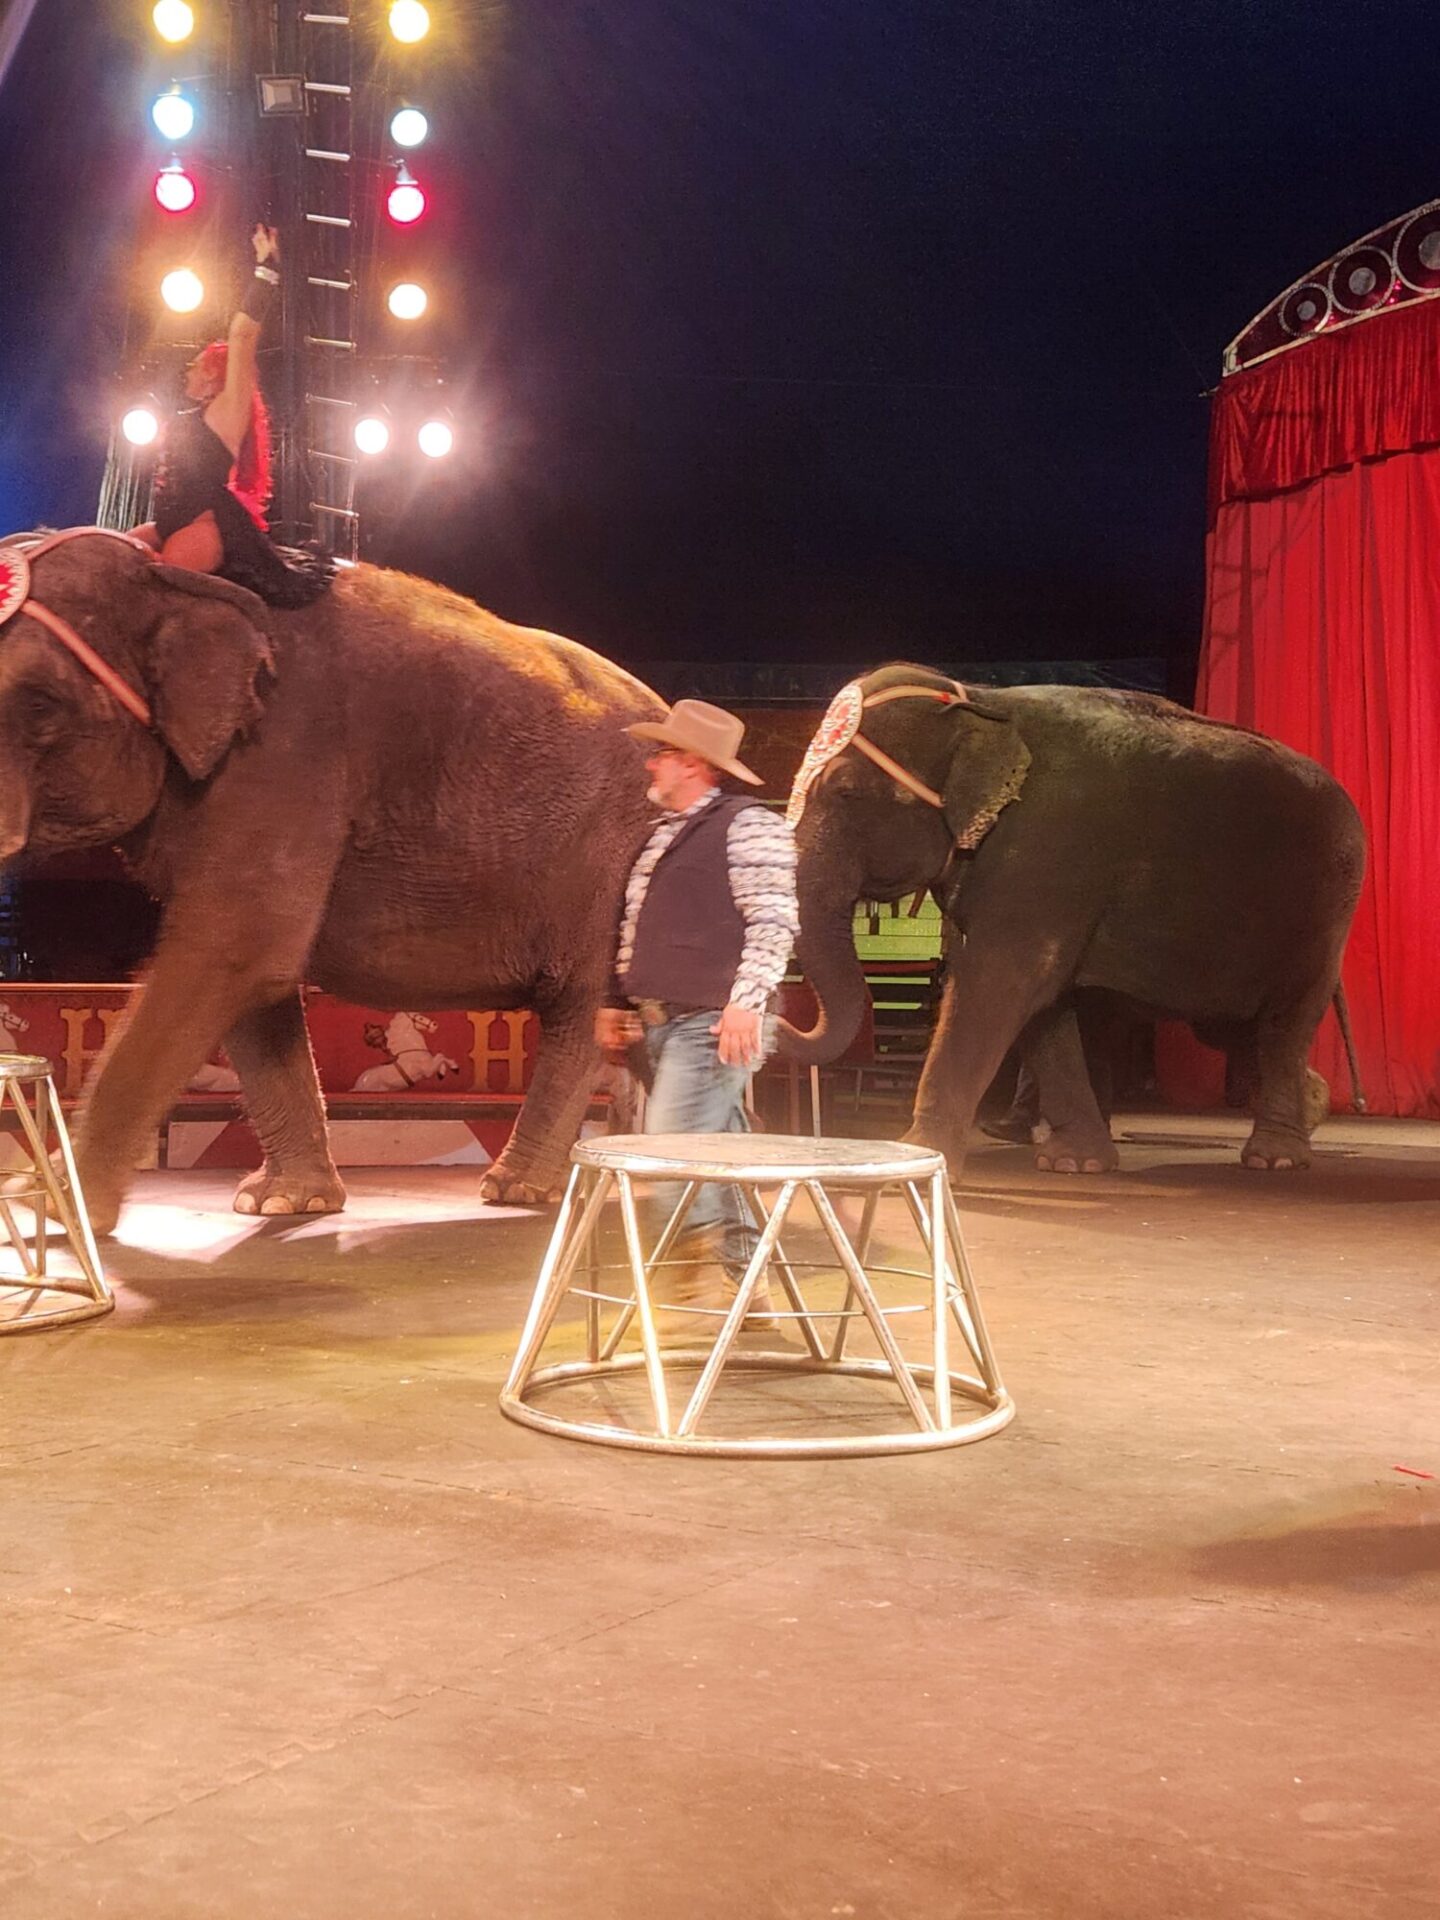 elephants in the circus